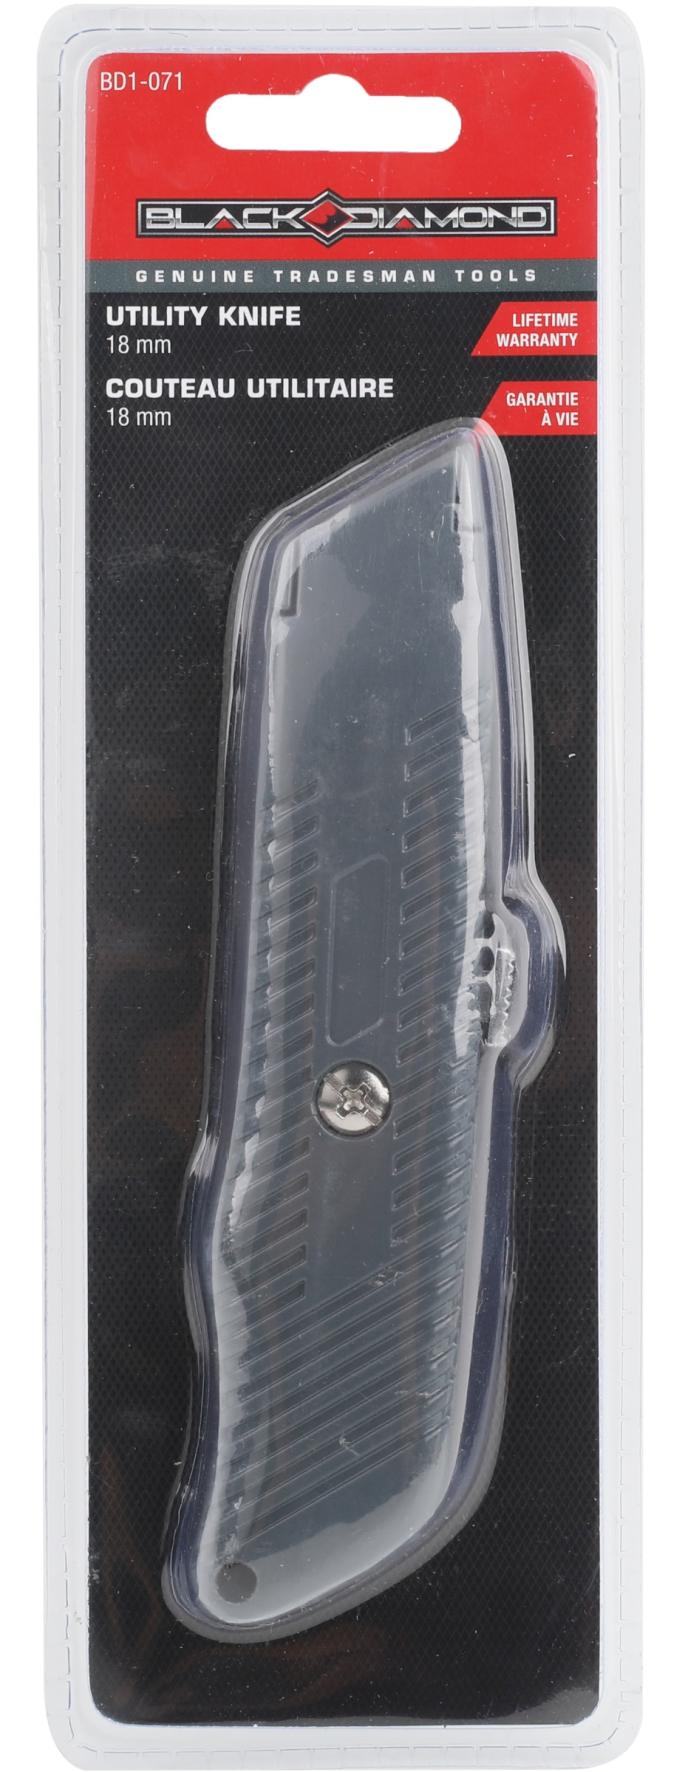 content/products/Black Diamond 18mm Utility Knife